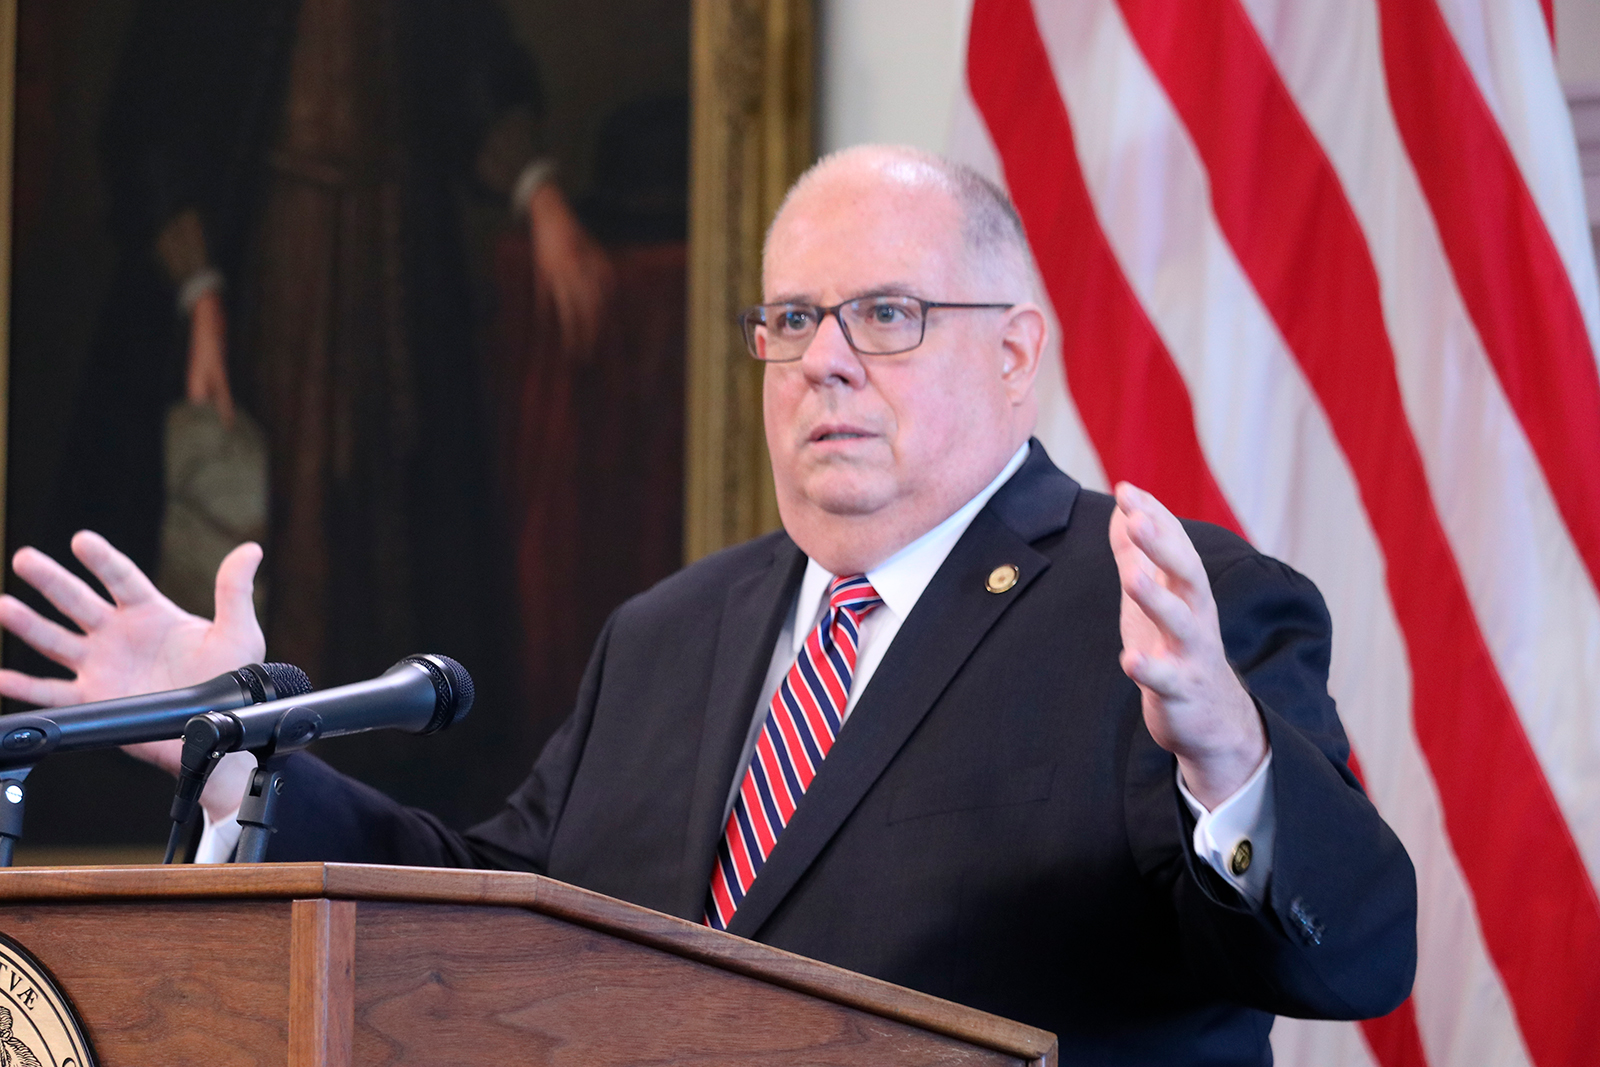 Maryland Gov. Larry Hogan speaks at a news conference on Wednesday, July 15, in Annapolis.